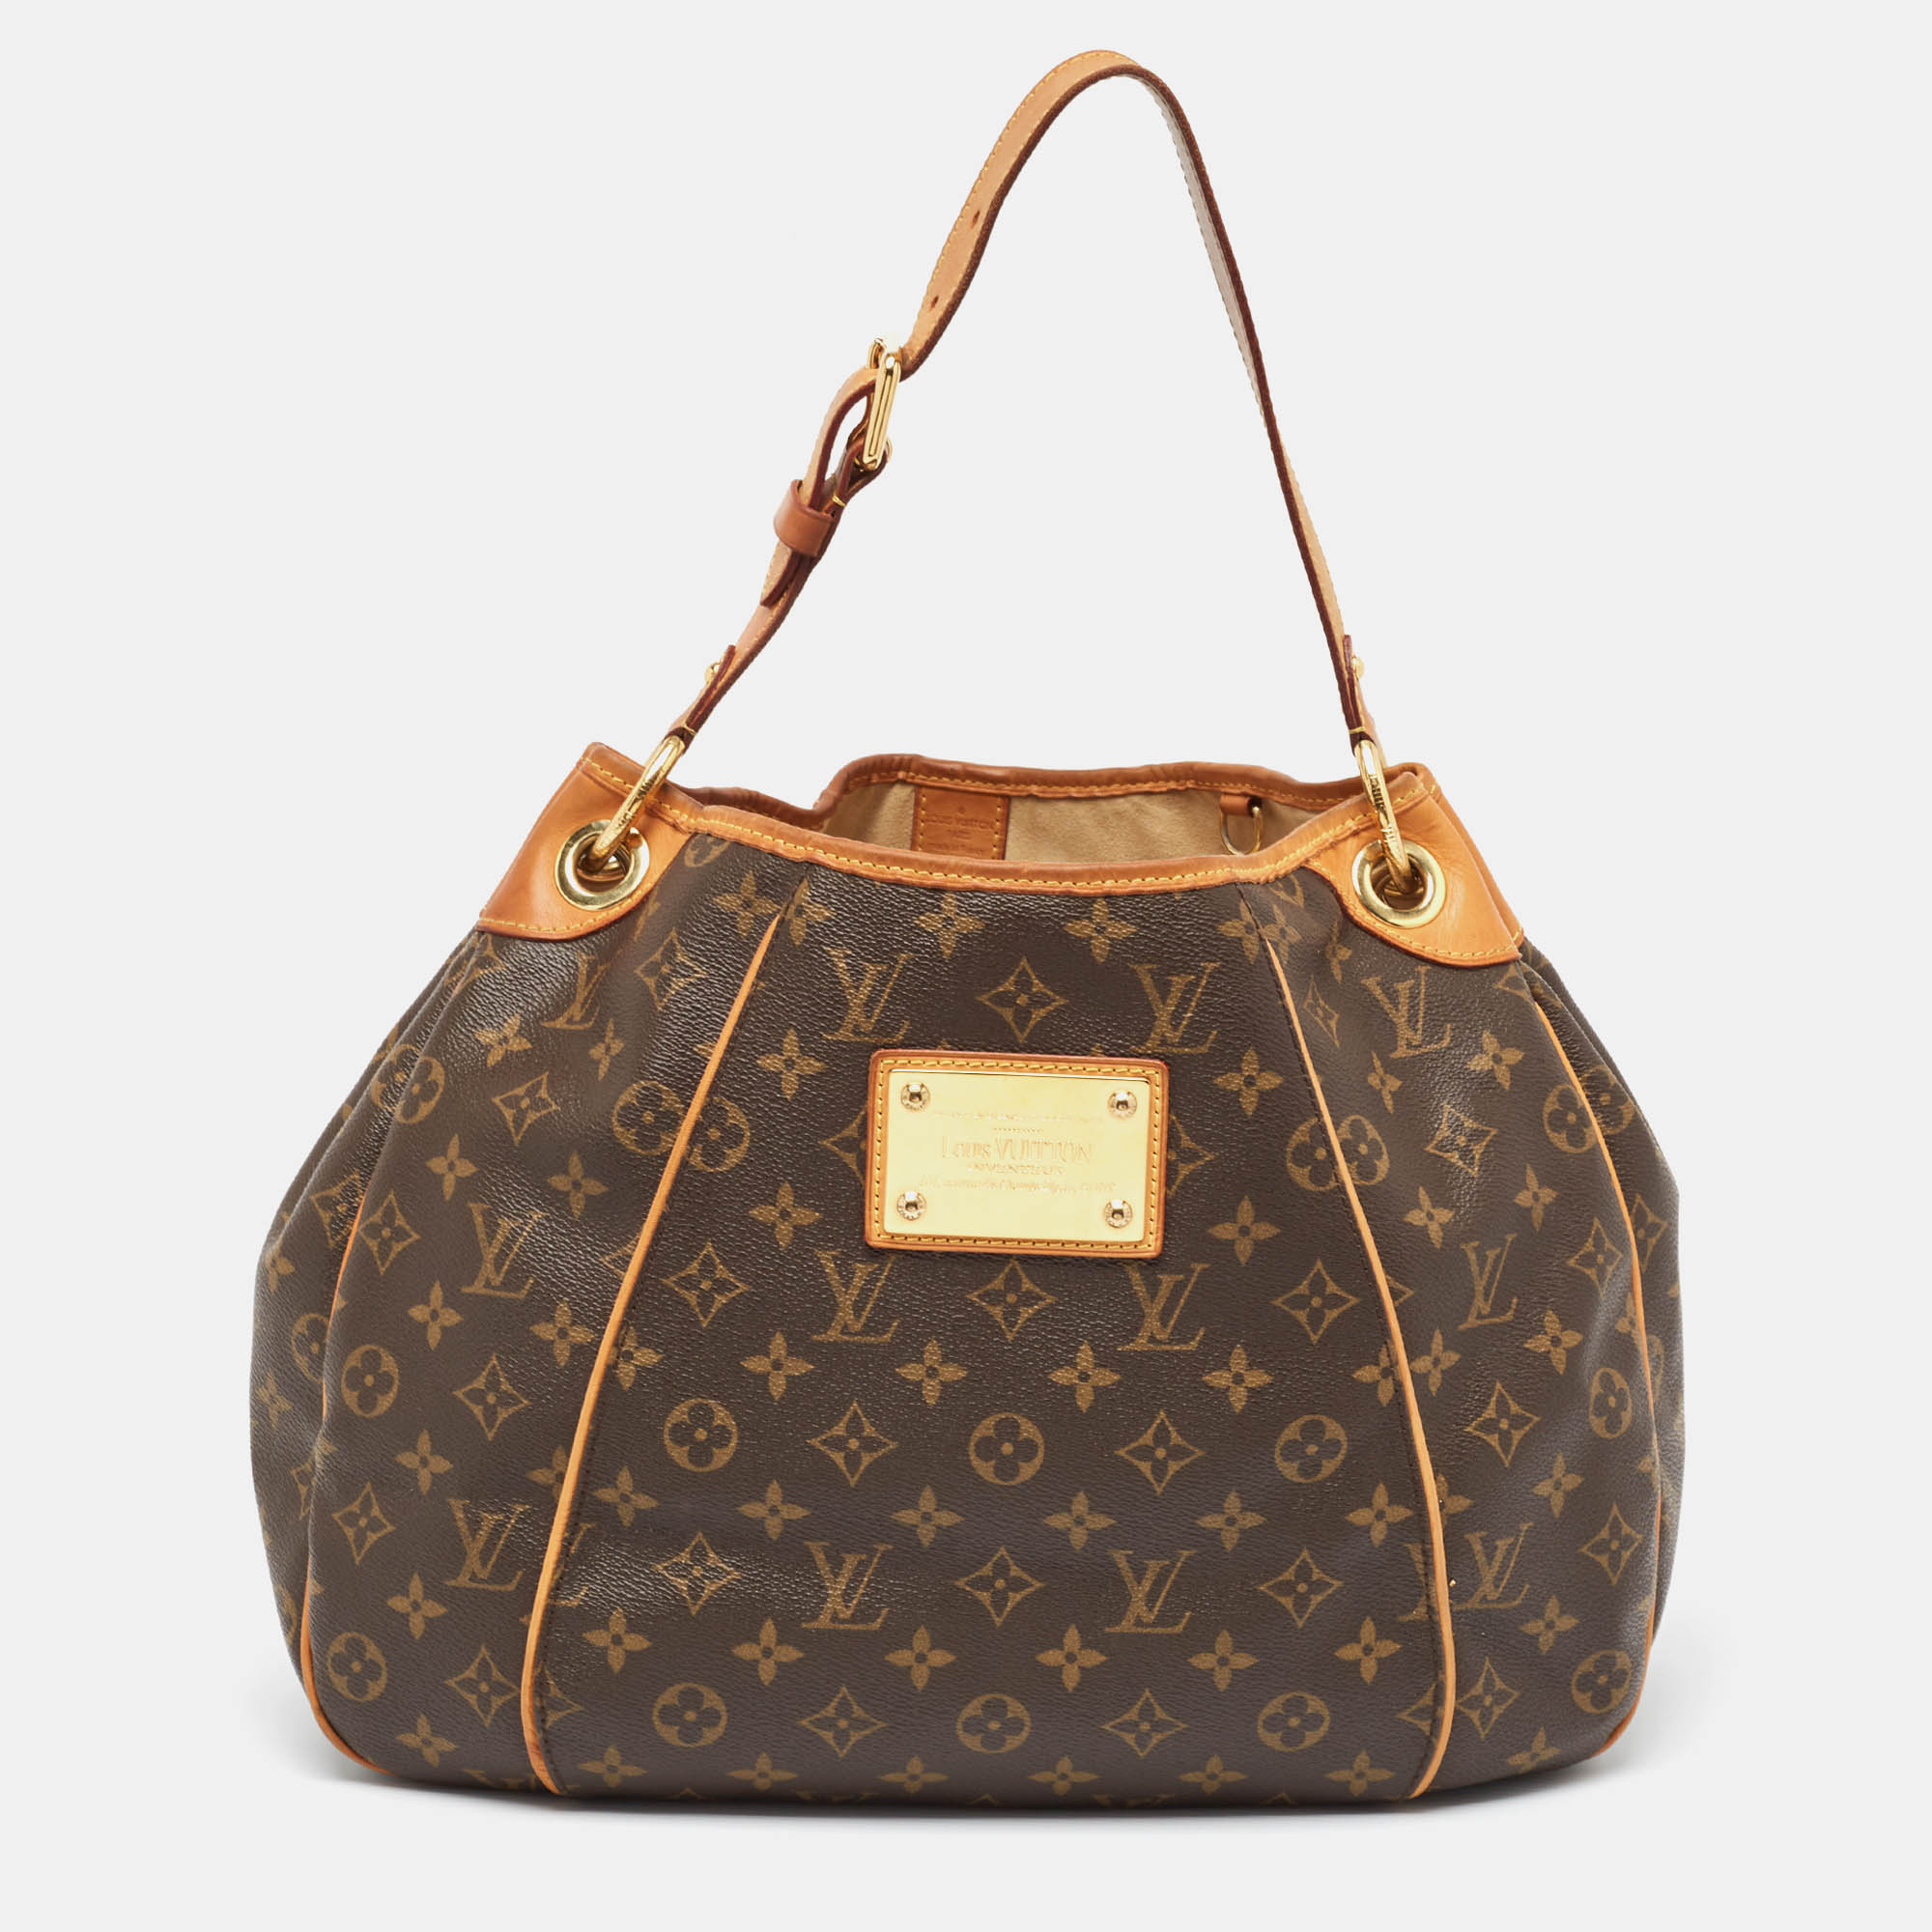 

Louis Vuitton Monogram Canvas and Leather Galliera PM Bag, Brown